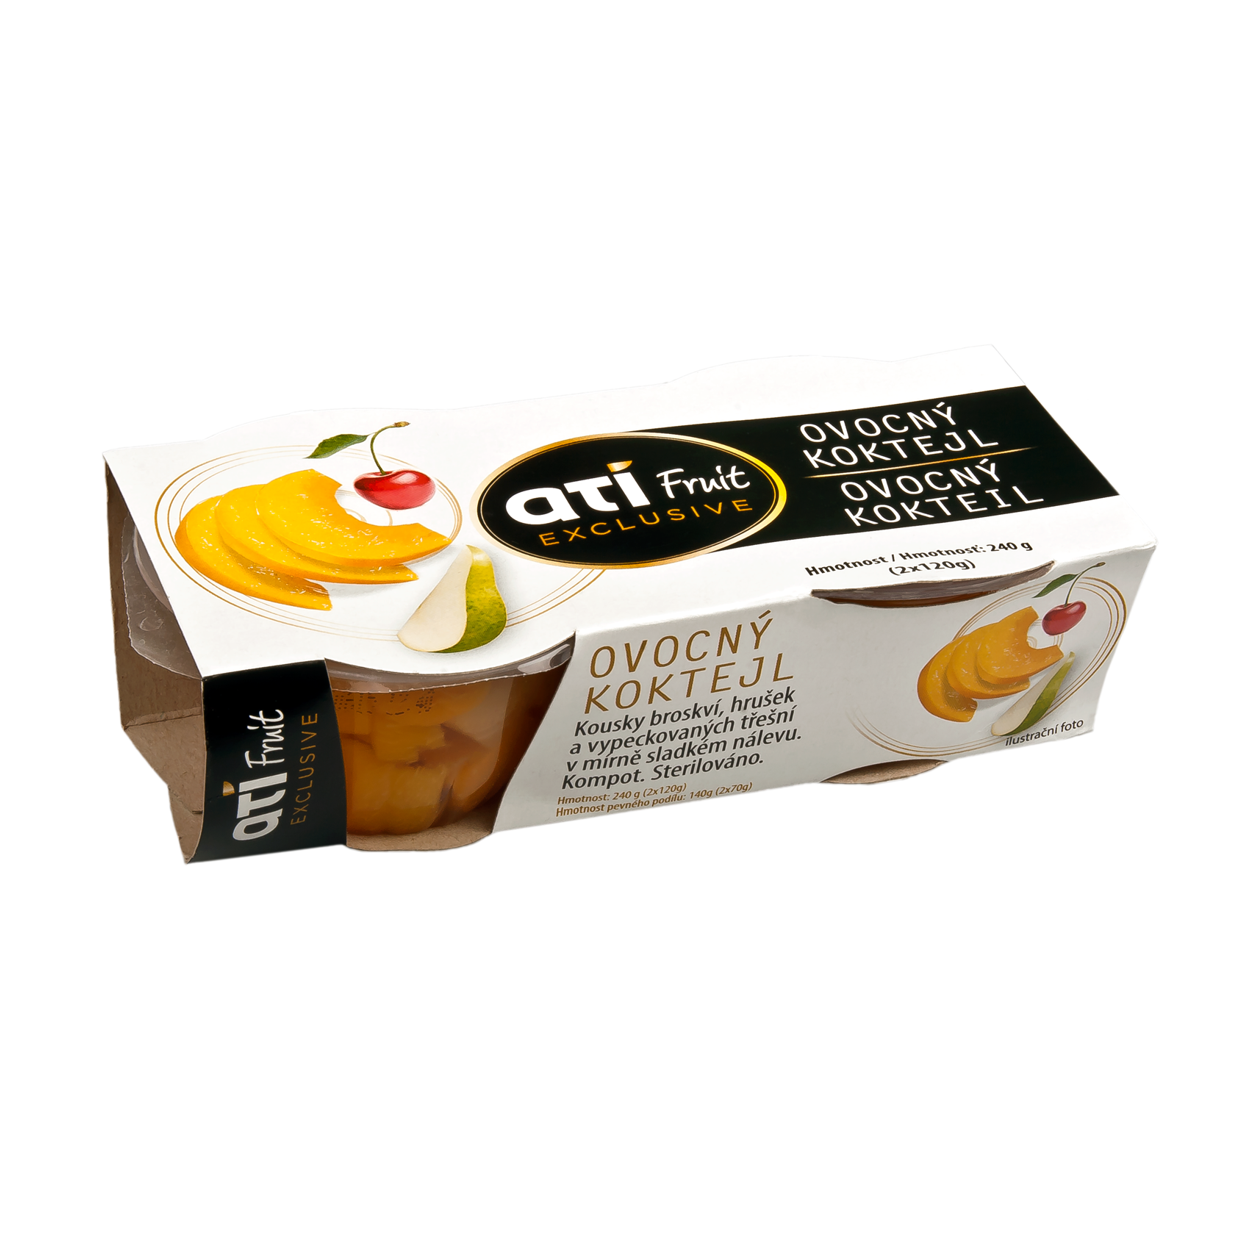 ATI Fruit Exclusive fruit cocktail 2 pack